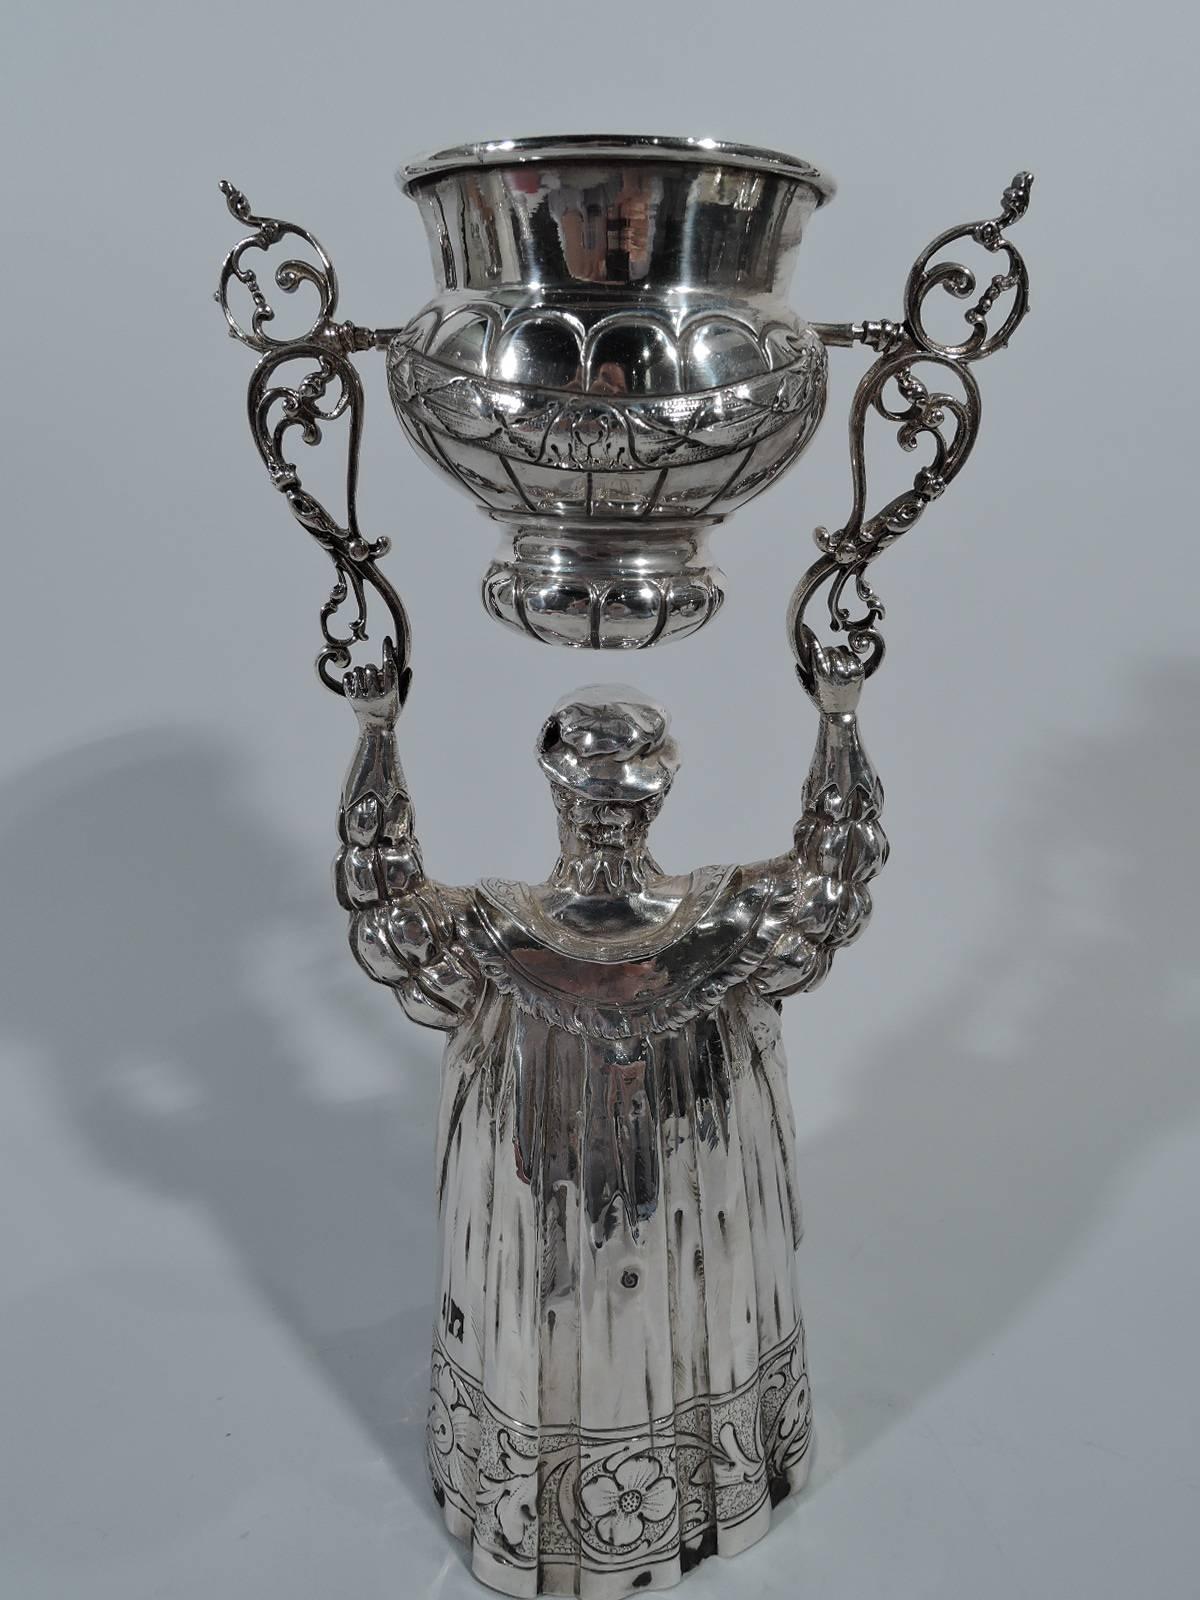 German sterling silver wedding king cup. Imported to Chester, England by Berthold Muller in 1901. A Renaissance prince holds aloft scrolled brackets to which are swing-mounted a lobed and double-domed cup. Period costume in form of sumptuous robe